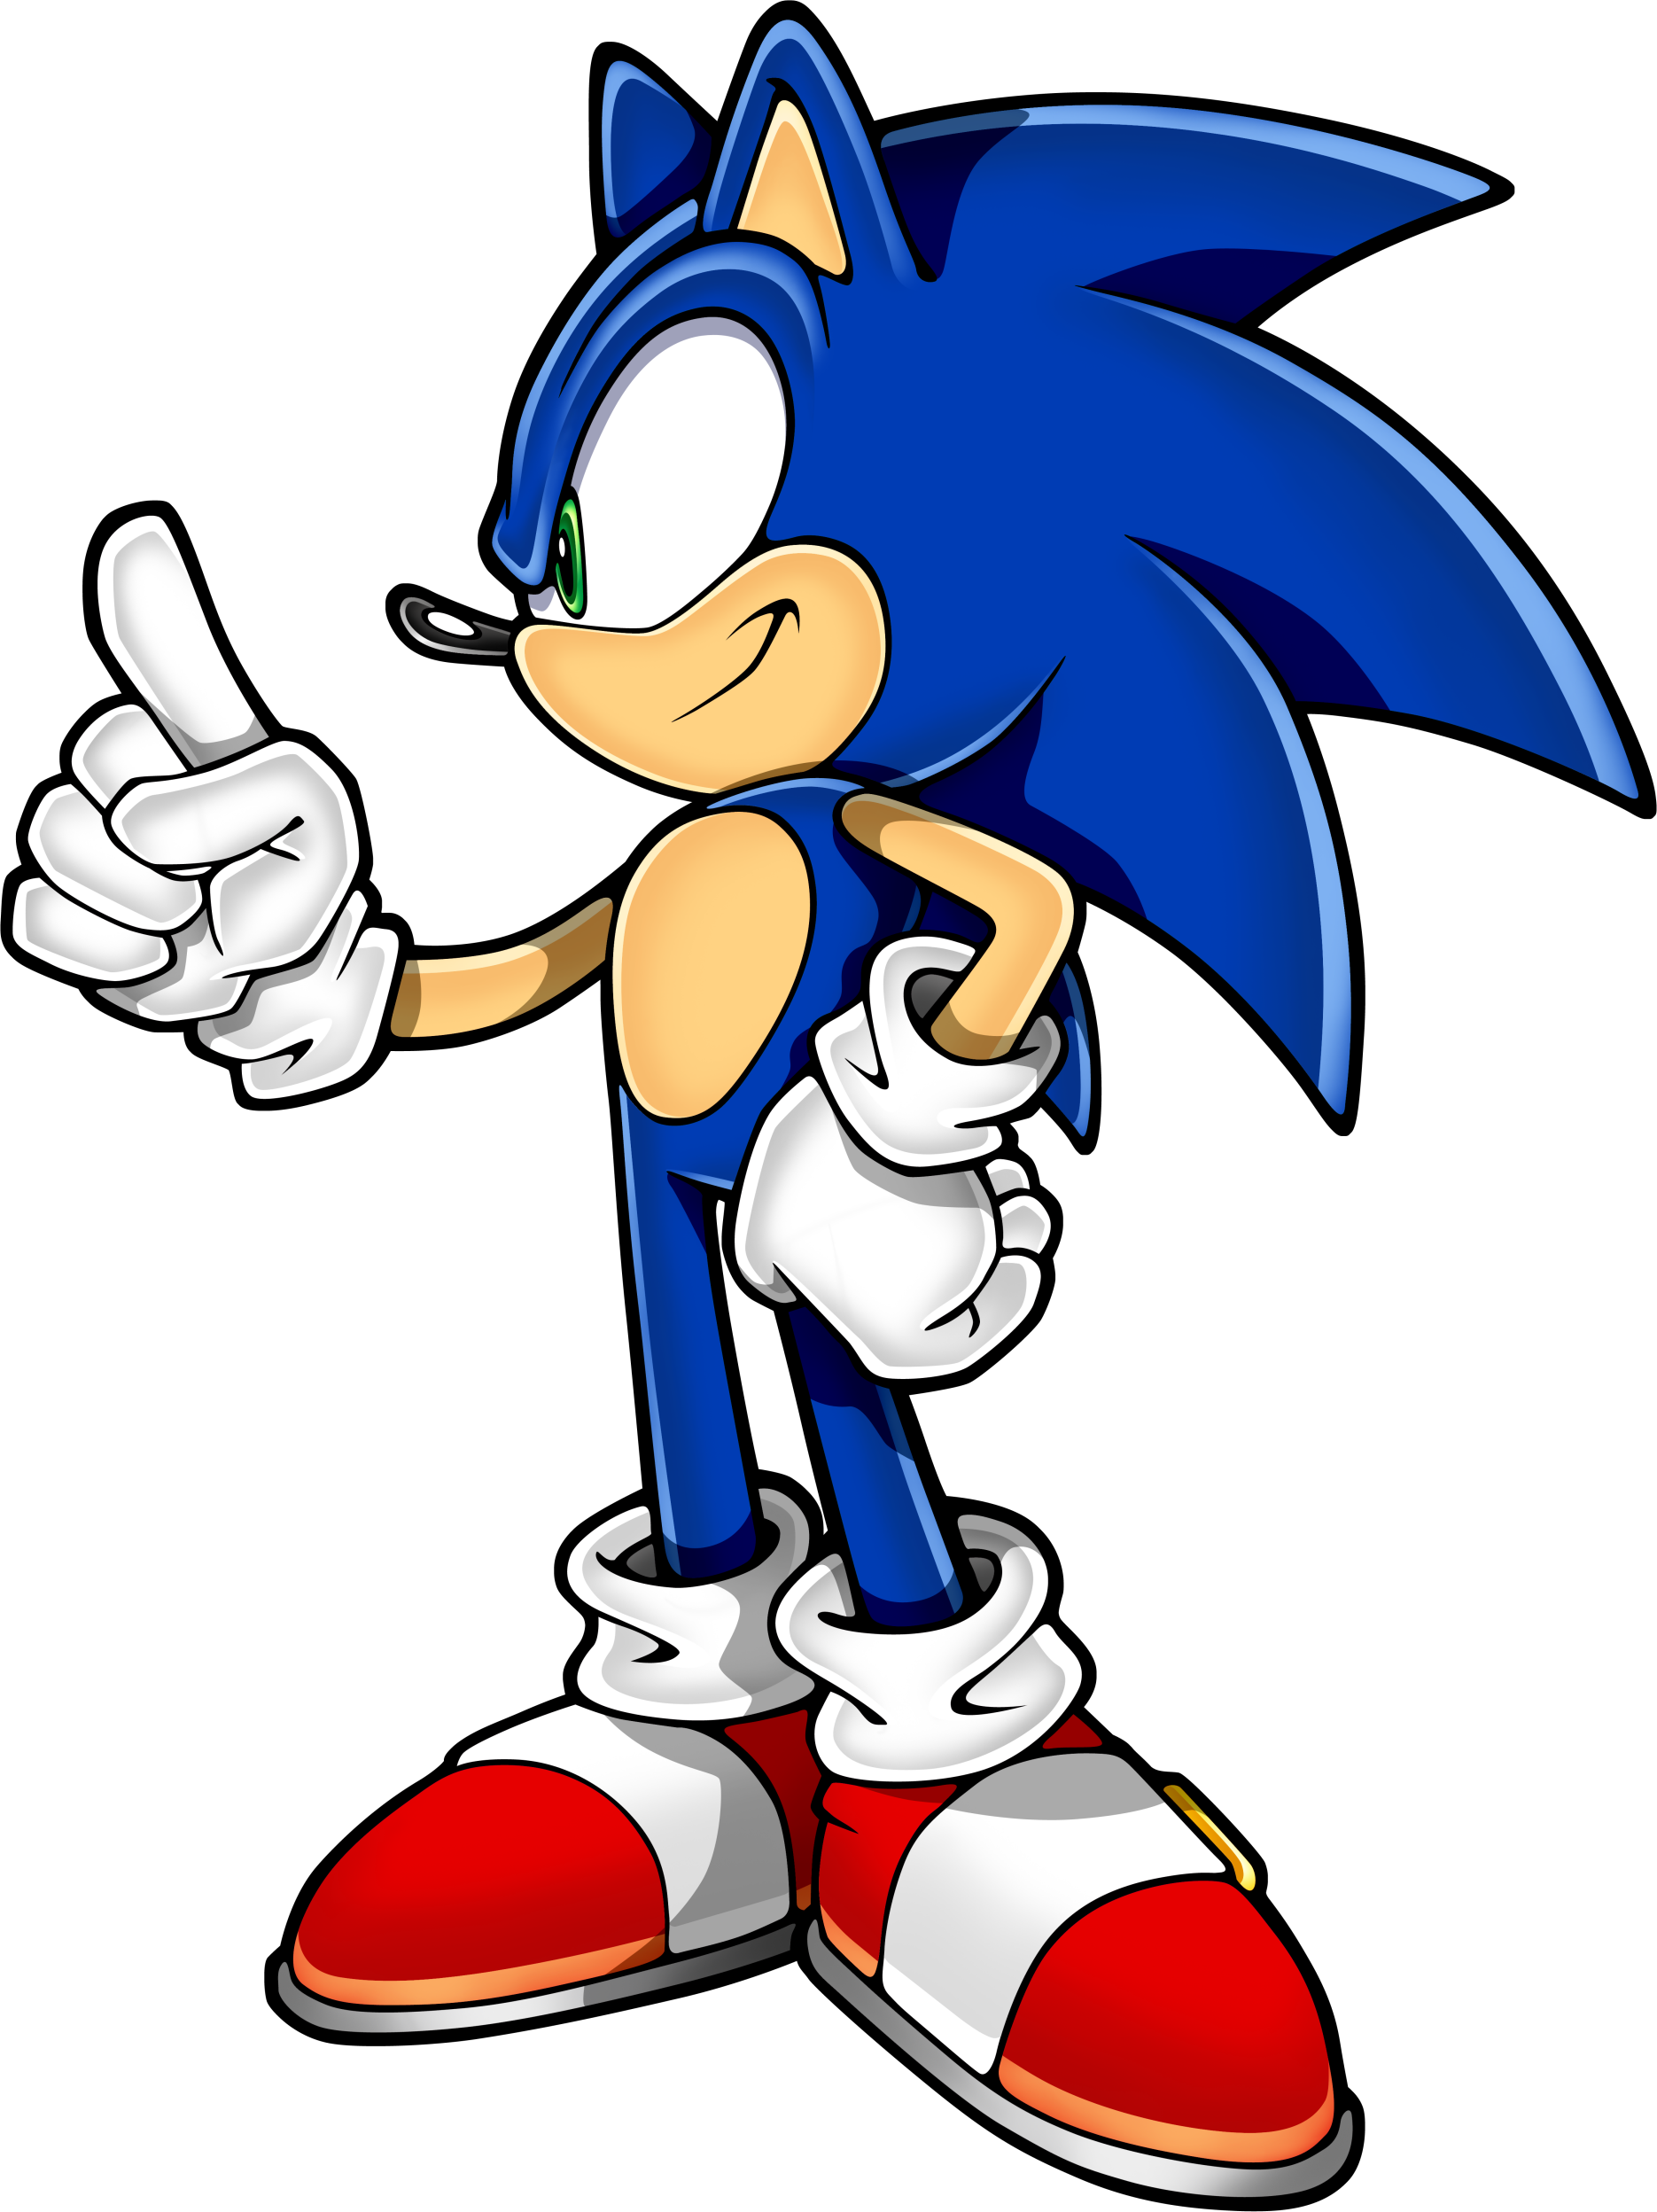 Sonic Art Assets Dvd   Sonic The Hedgehog   13.png - Sonic The Hedgehog, Transparent background PNG HD thumbnail